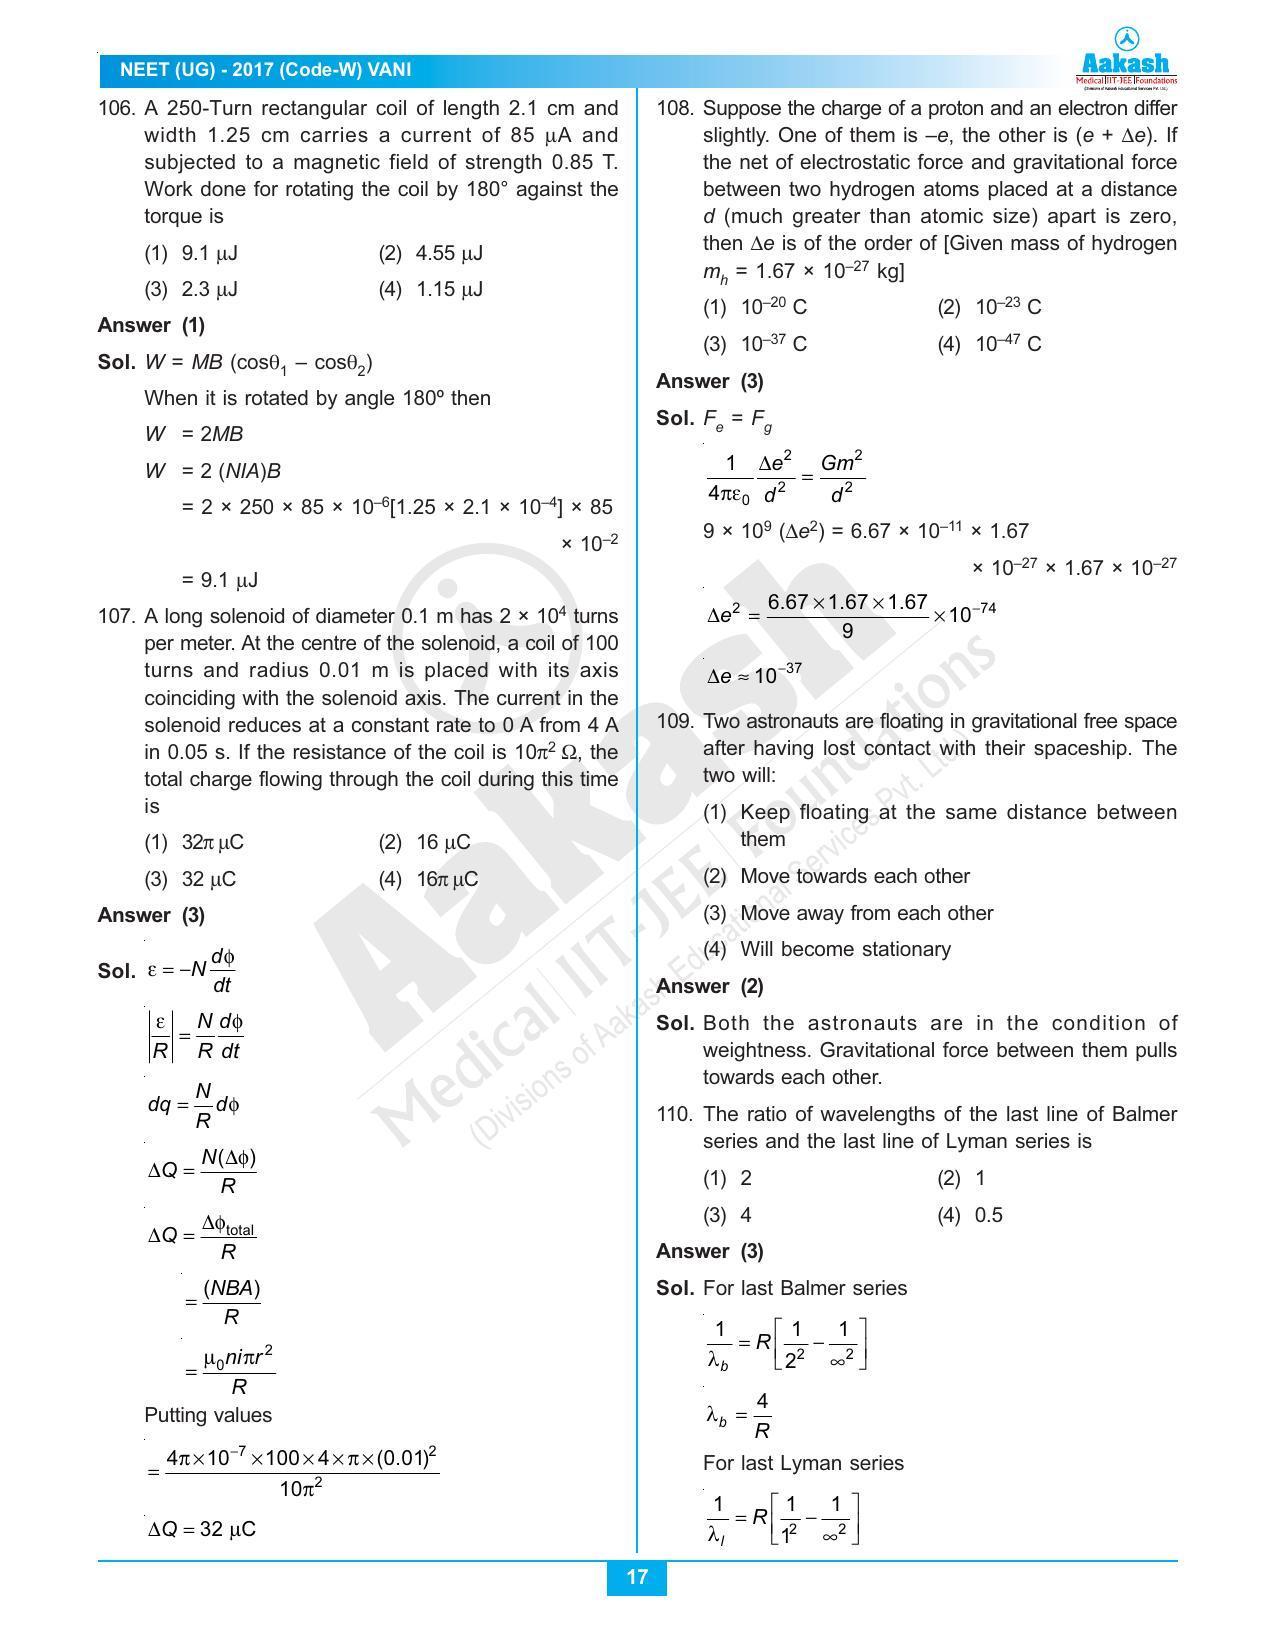  NEET Code W 2017 Answer & Solutions - Page 17